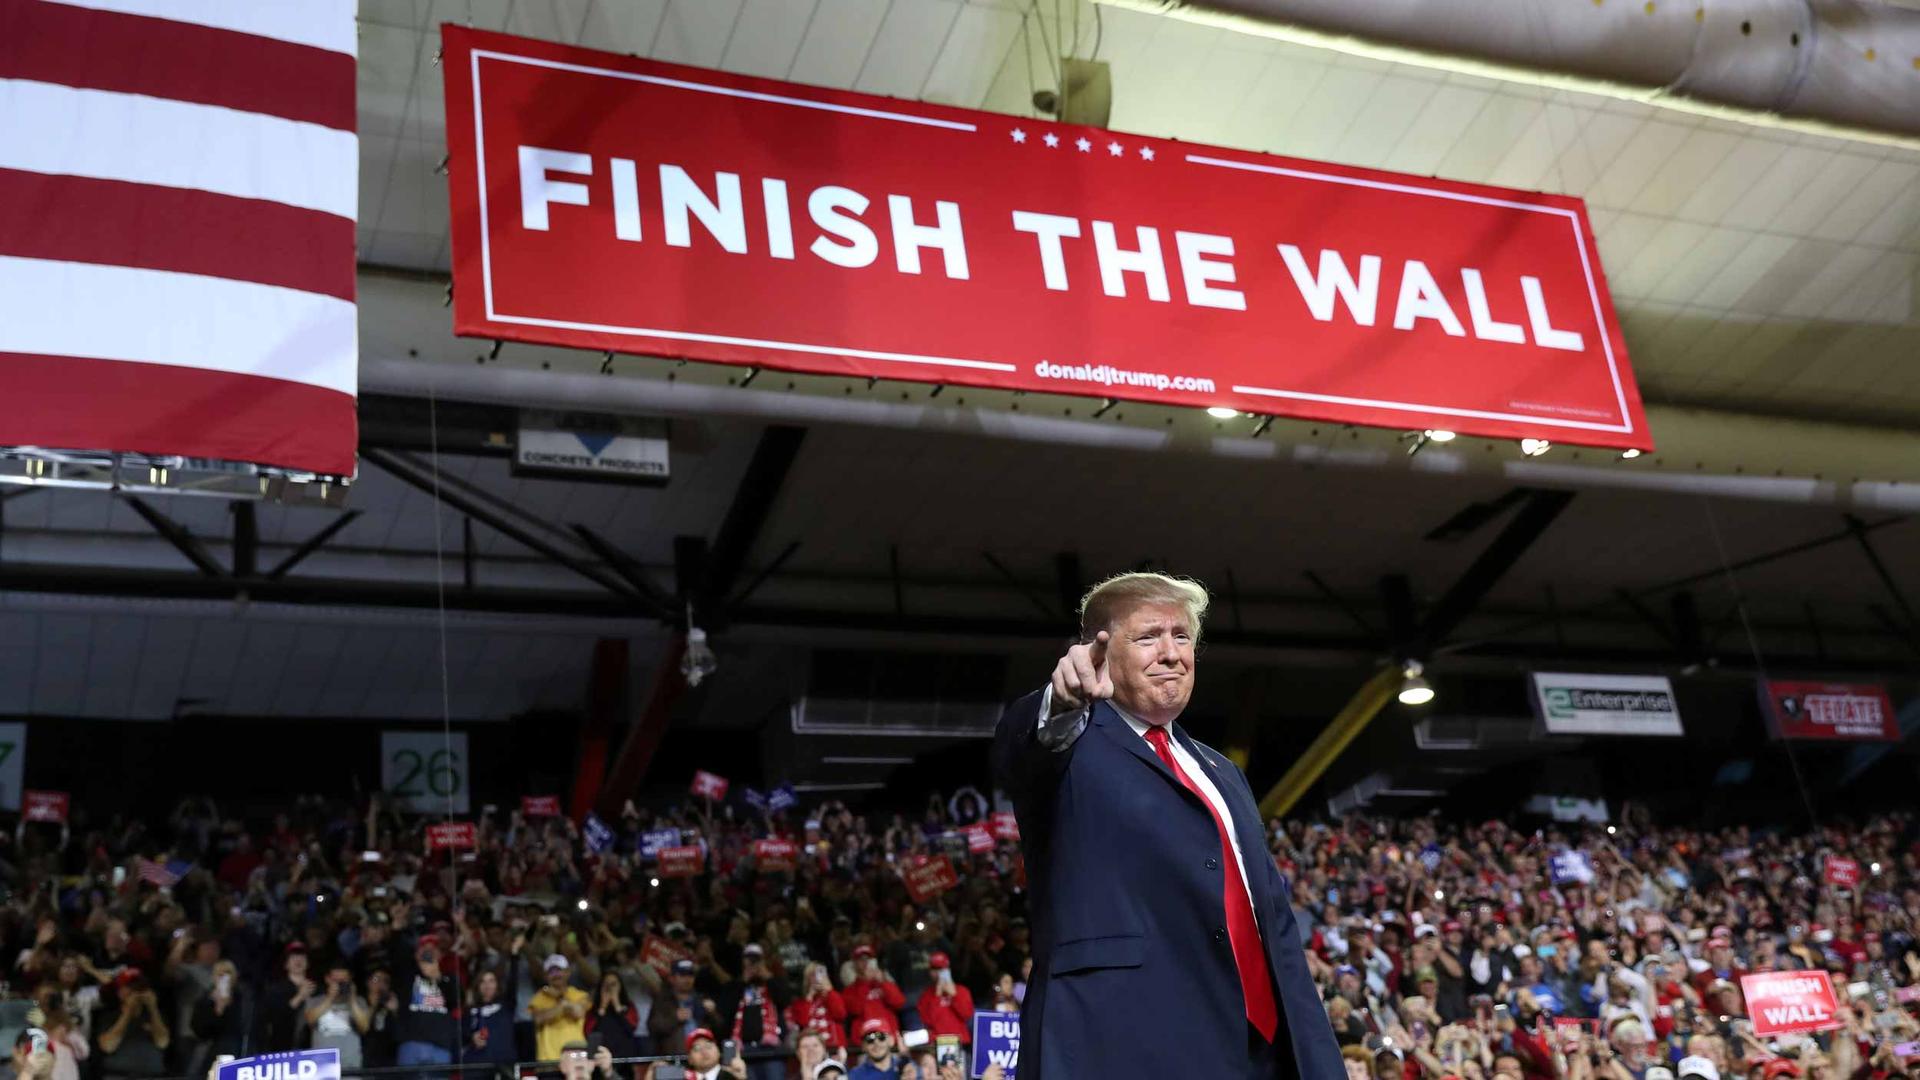 Donald Trump stands in an arena with a banner overhead that reads "Finish the wall."